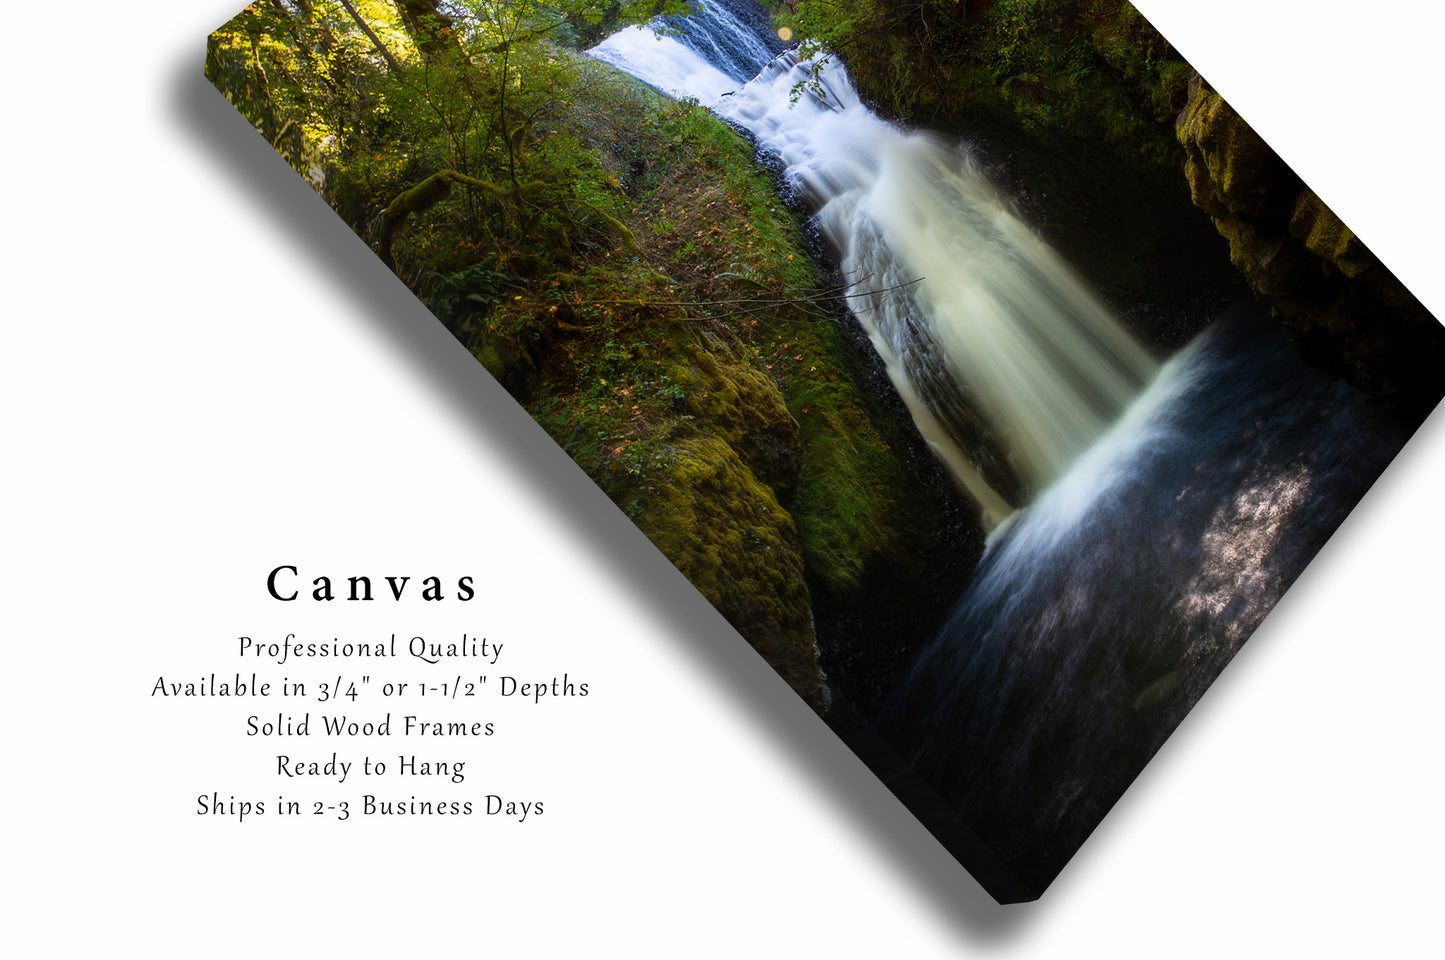 Bridal Veil Falls Canvas | Vertical Waterfall Gallery Wrap | Pacific Northwest Photography | Oregon Wall Art | Nature Decor | Ready to Hang